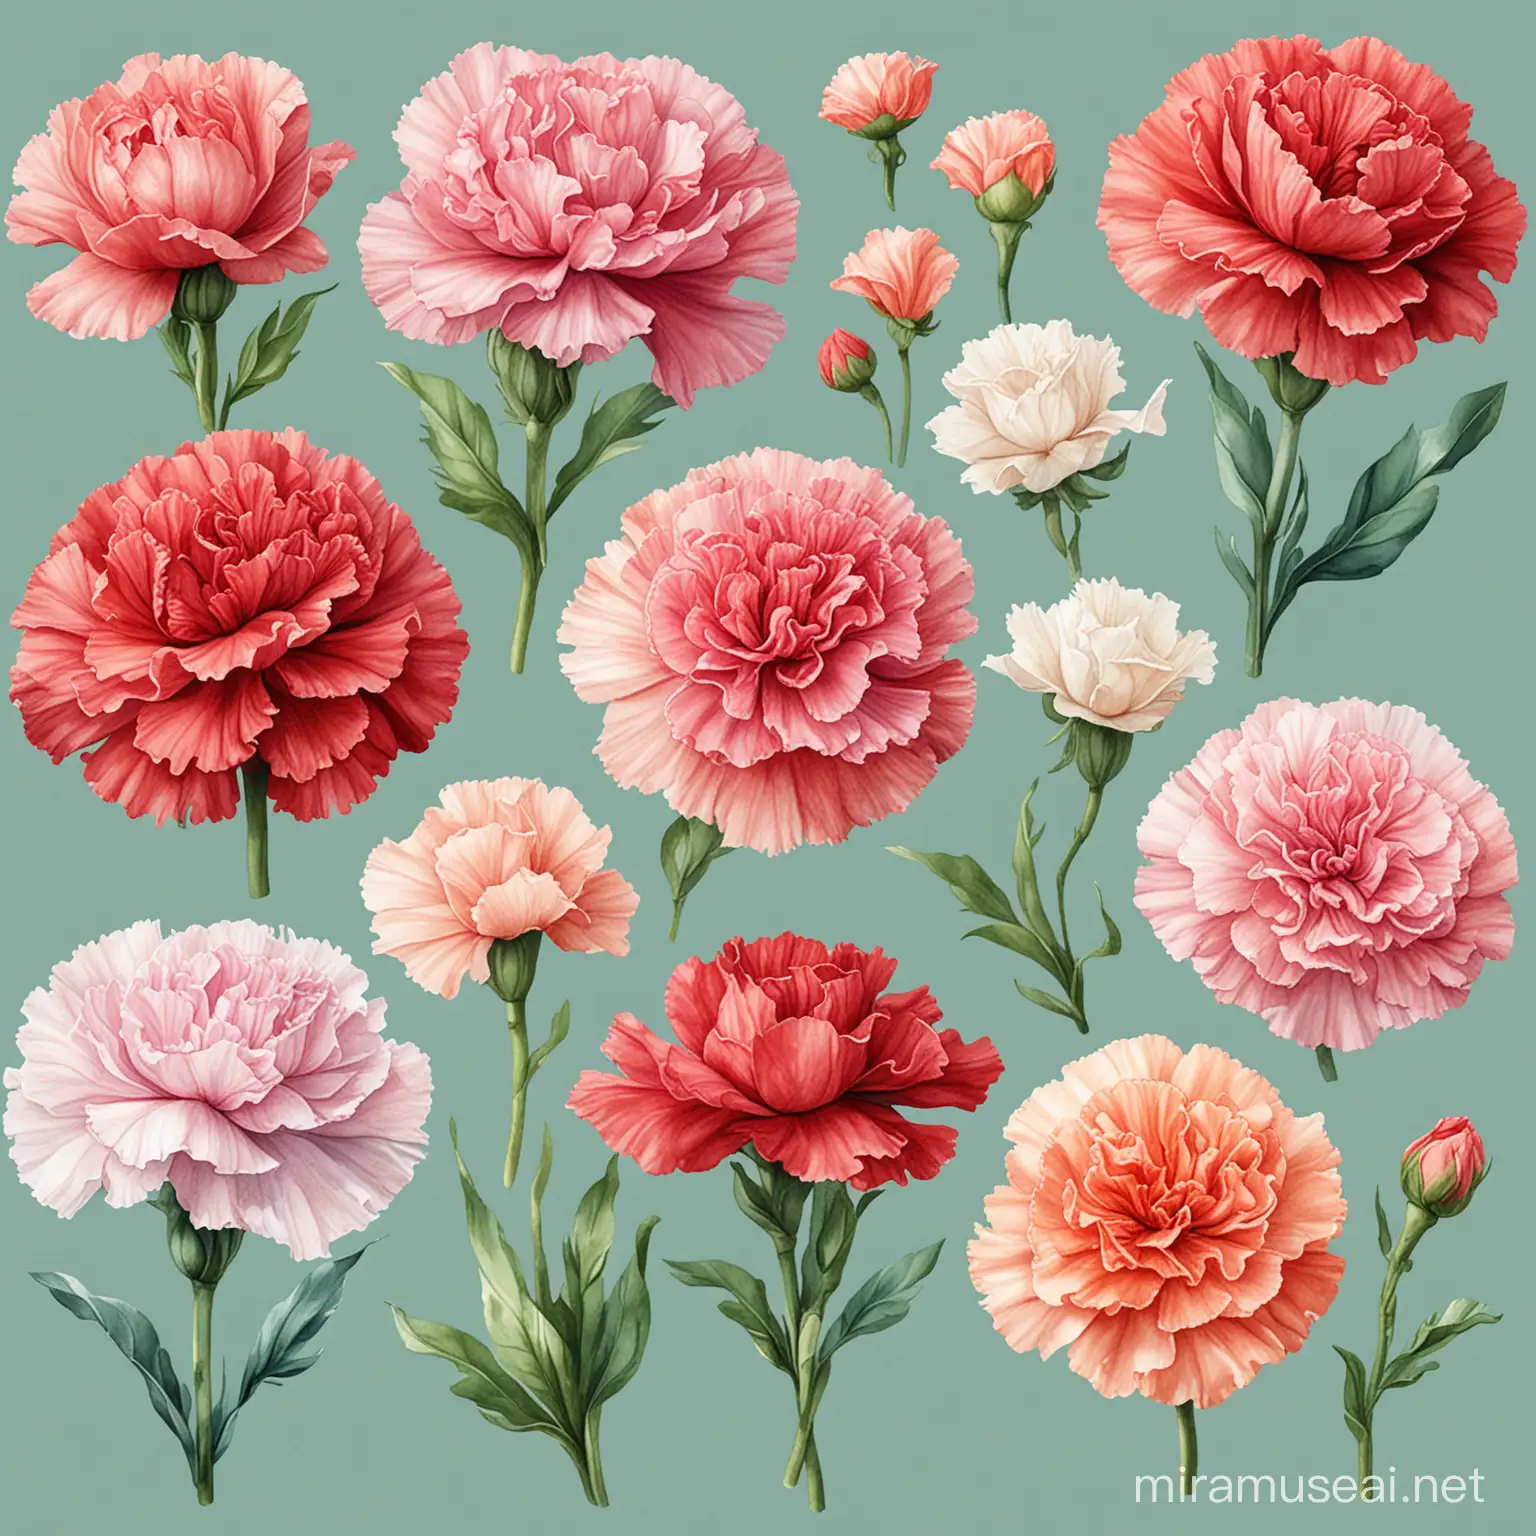 Watercolor carnation clipart in various colors, including pink, red, and white.
